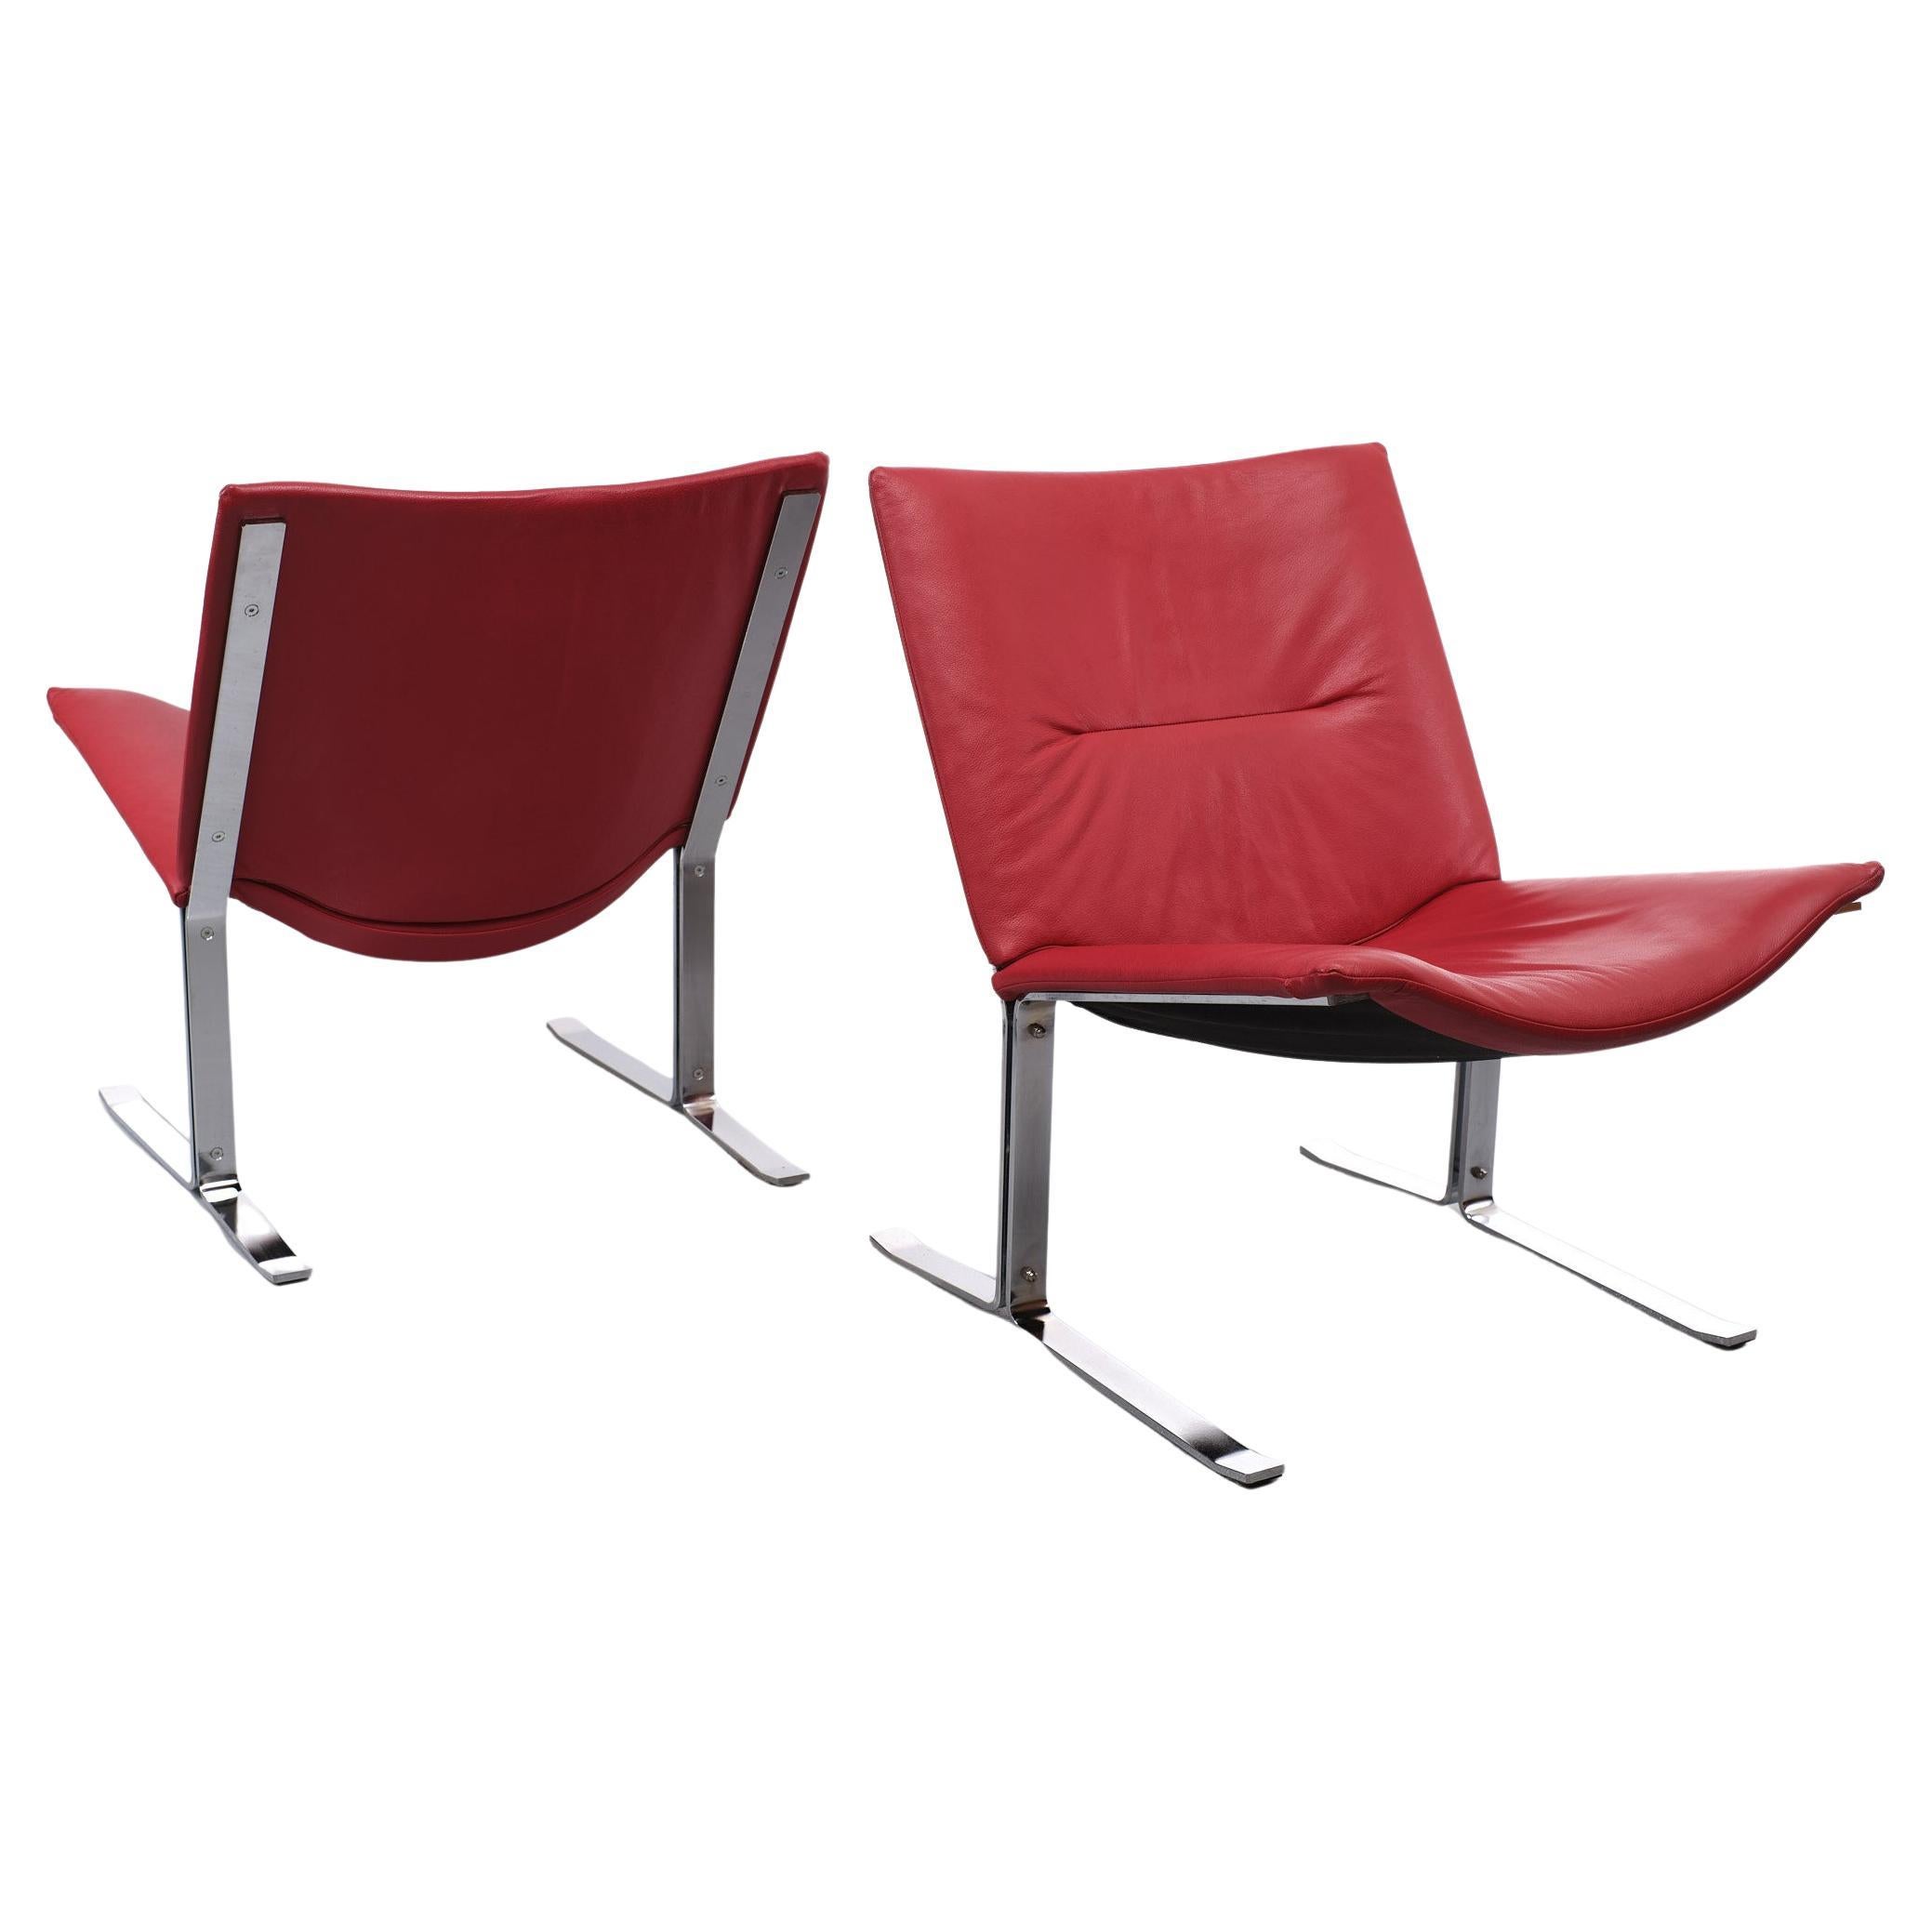 Two beathiful Red Leather lounge chairs. comes on a Chrome base. 
Very nice color. Good seating comfort. and good condition.